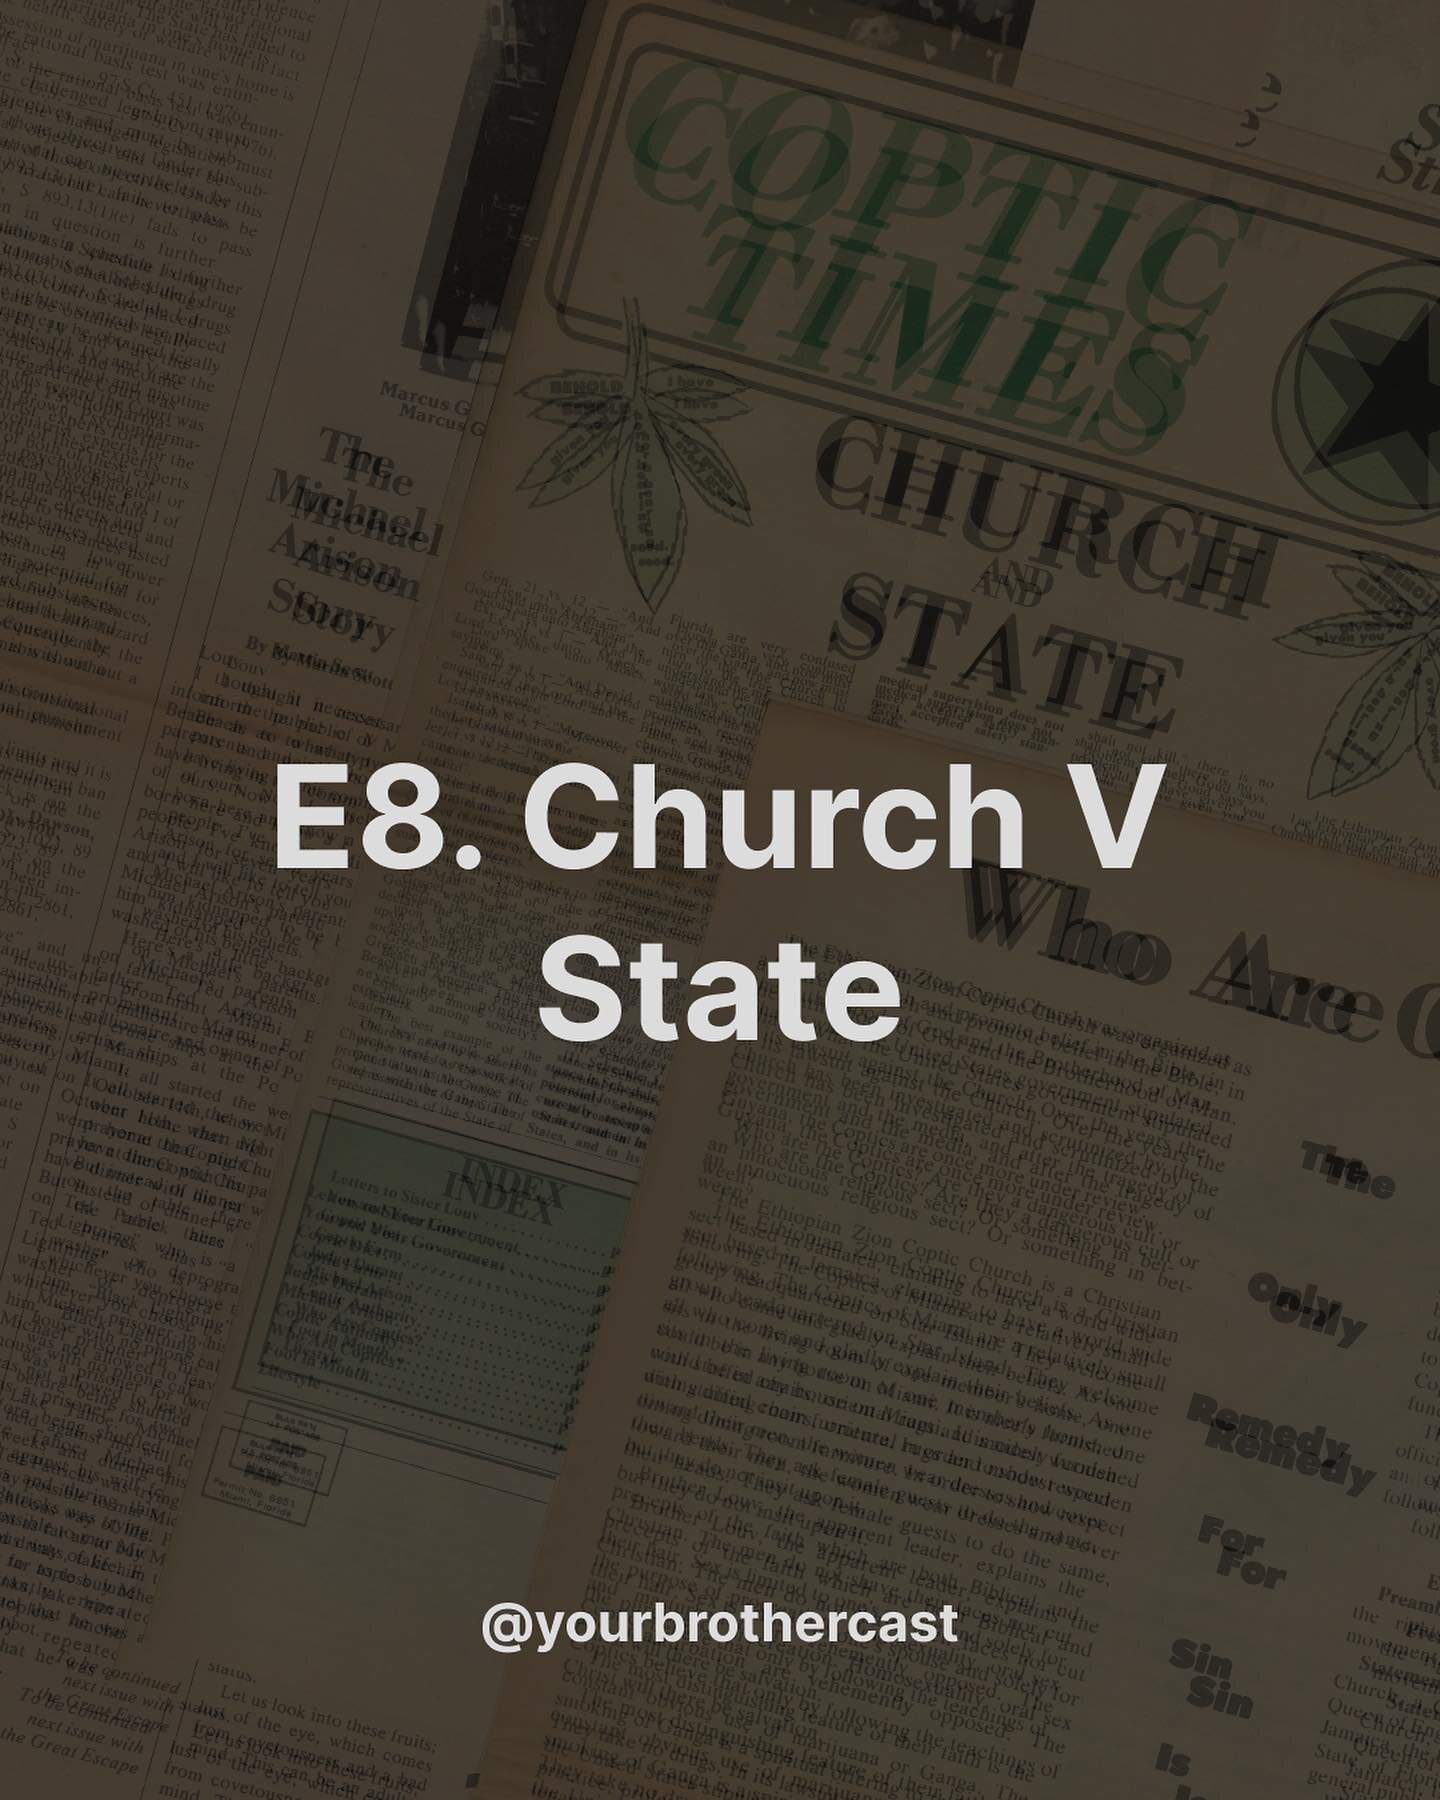 Hello! Episode 8: &ldquo;Church V State&quot; will be released tomorrow at 18:00 CEST! 🎙️

#newepisode #tunein #podcastshow